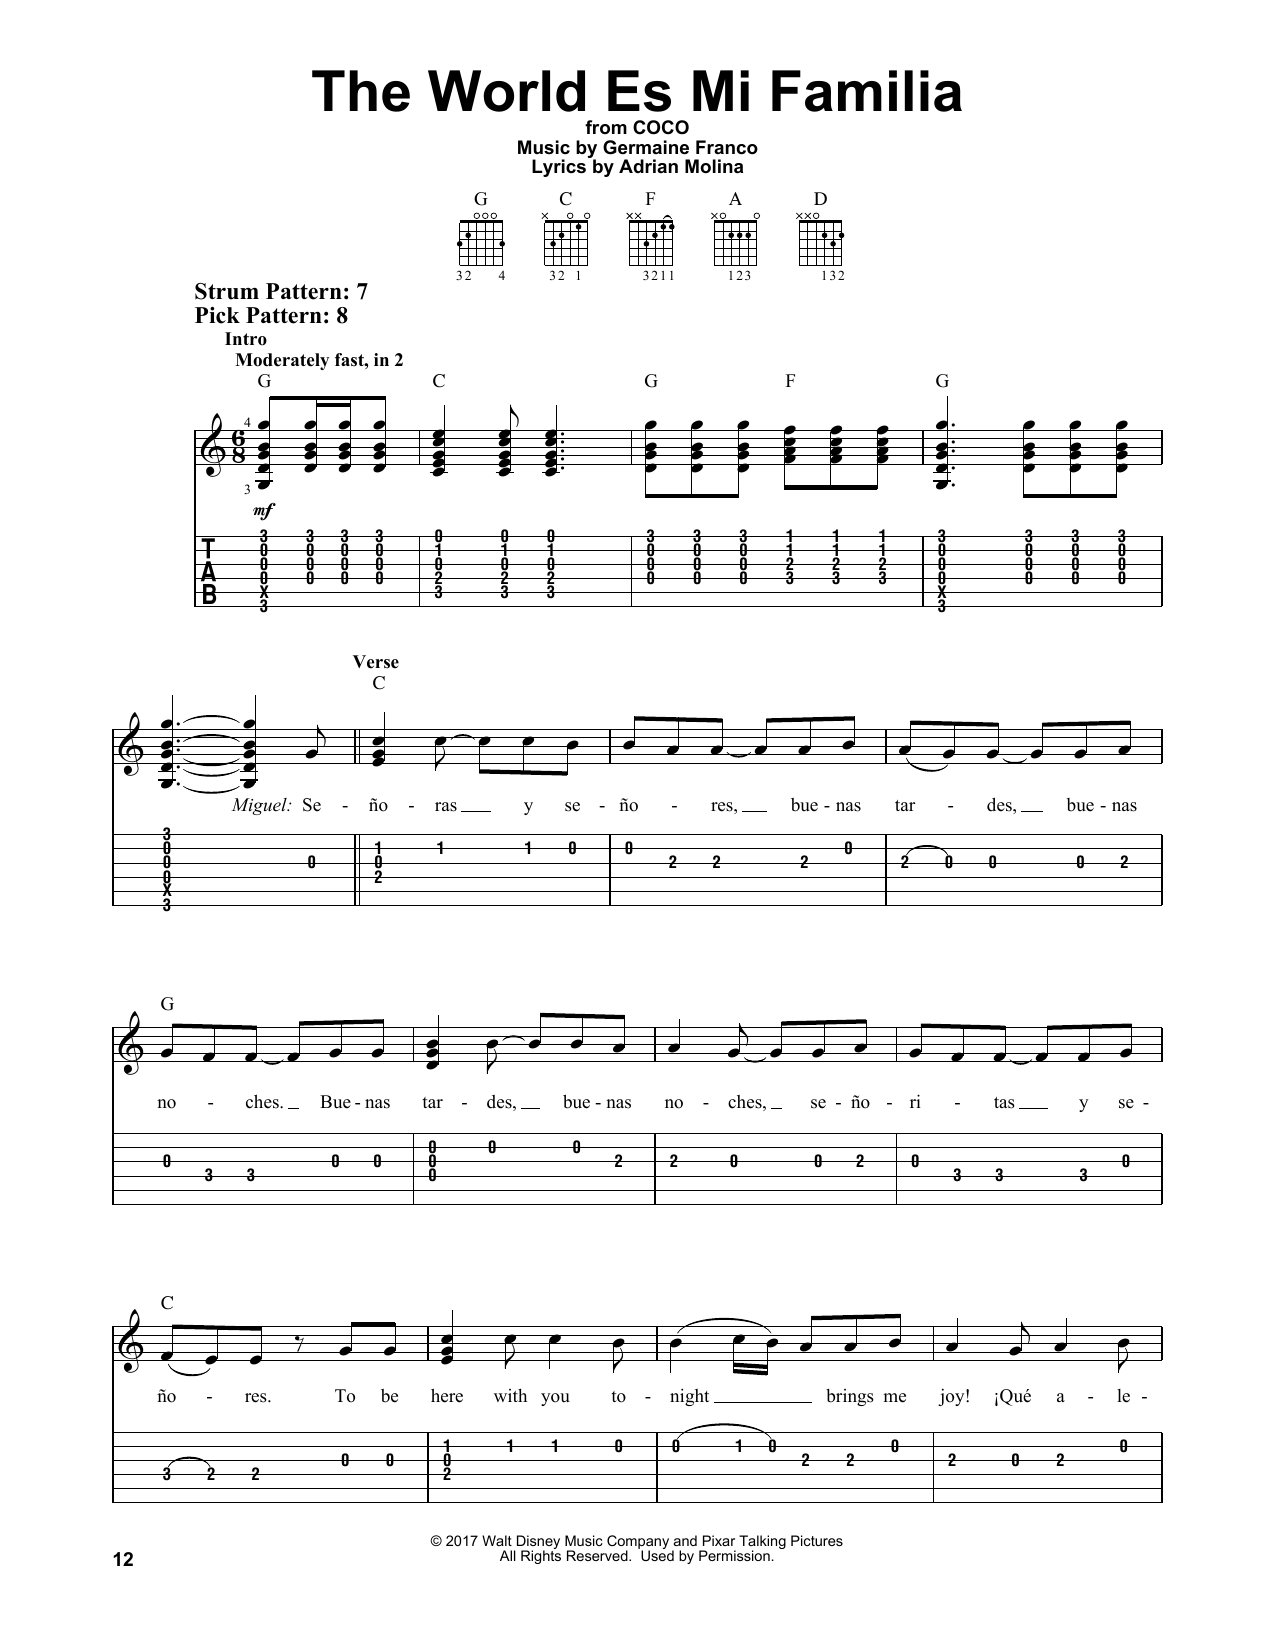 Download Germaine Franco & Adrian Molina The World Es Mi Familia (from Coco) Sheet Music